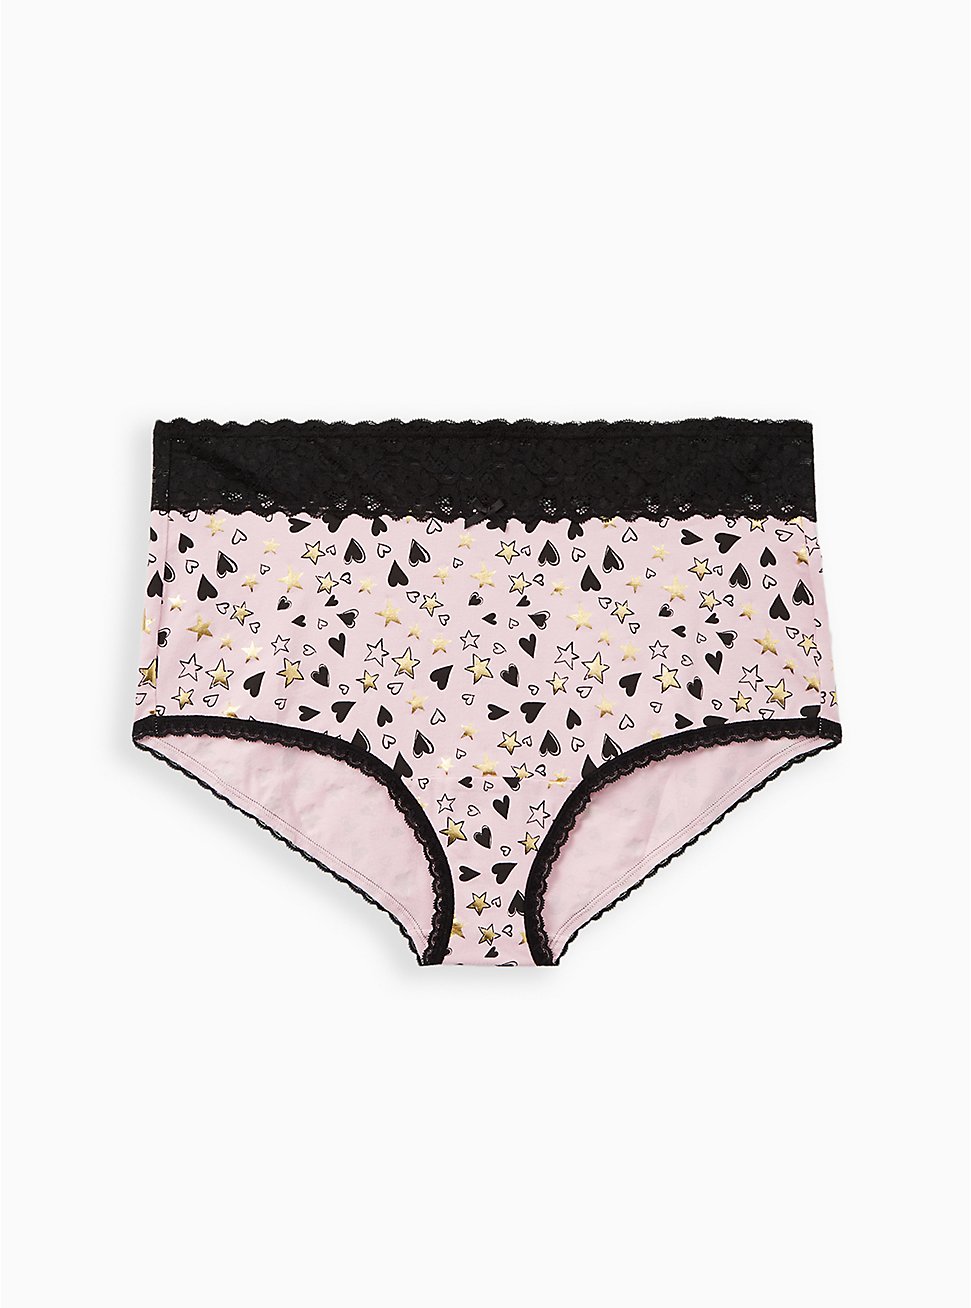 Wide Lace Trim Brief Panty - Cotton Hearts & Stars Pink , MULTI, hi-res